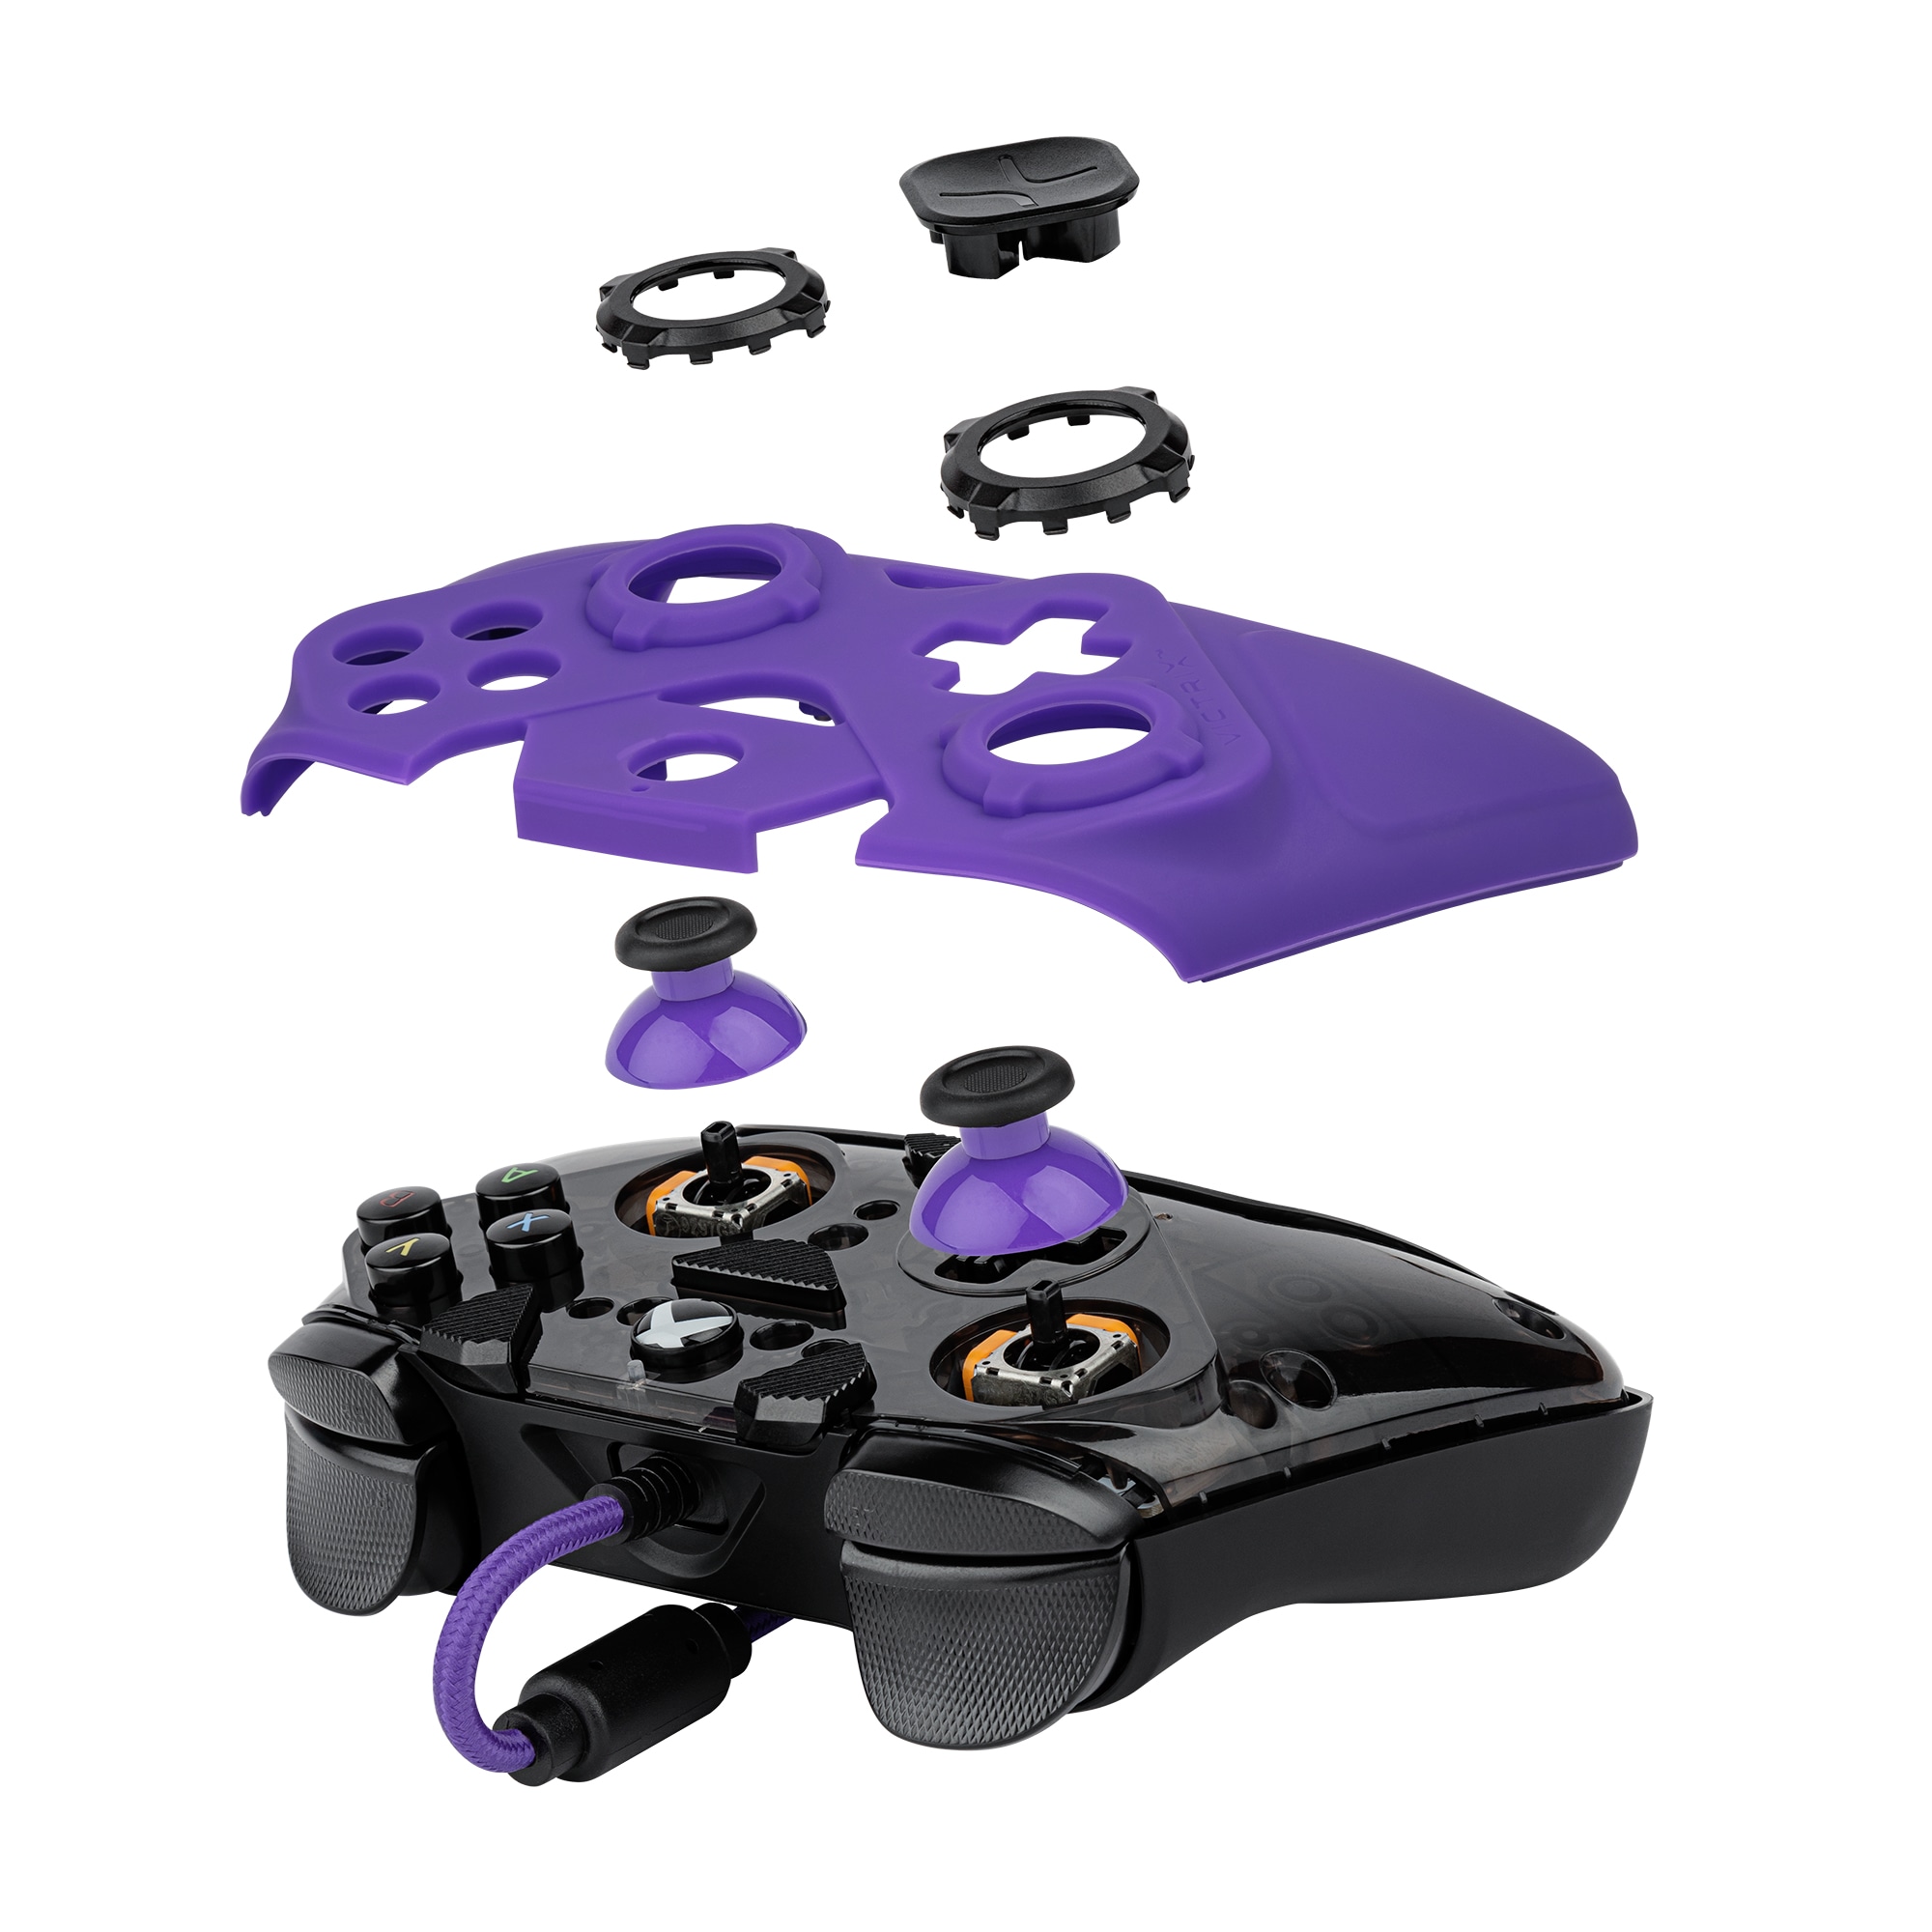 PDP - Performance Designed Products Gamepad »Victrix Gambit Tournament weißXBOX Series X«